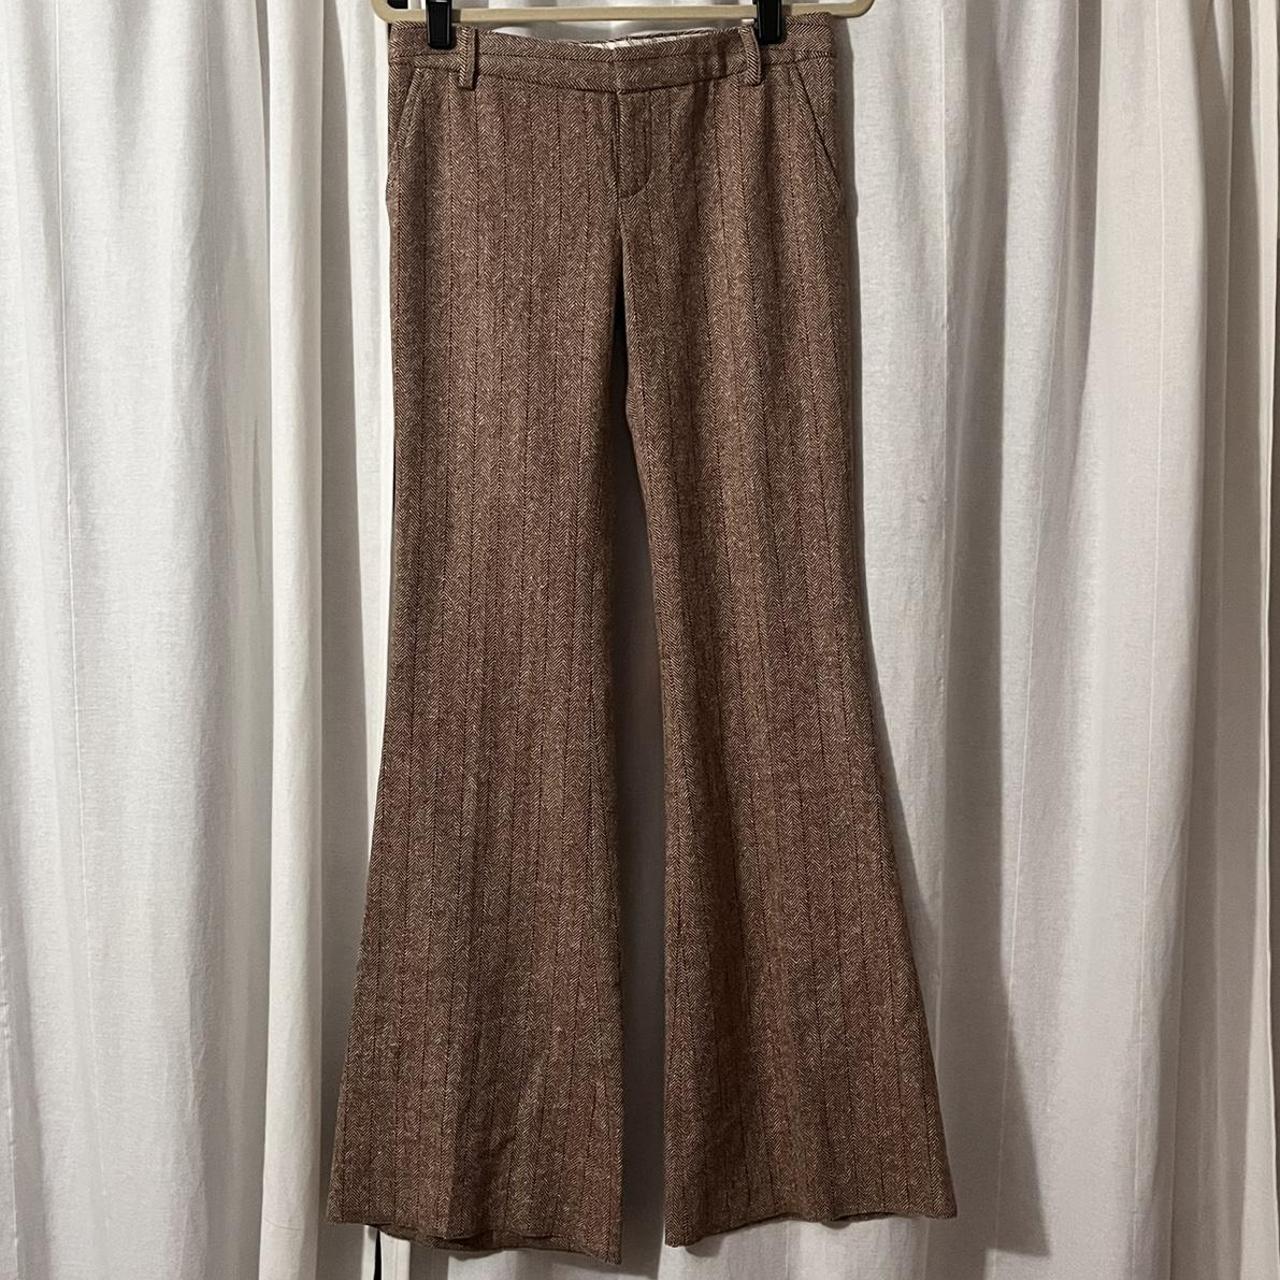 Barney's Women's Burgundy and Brown Trousers